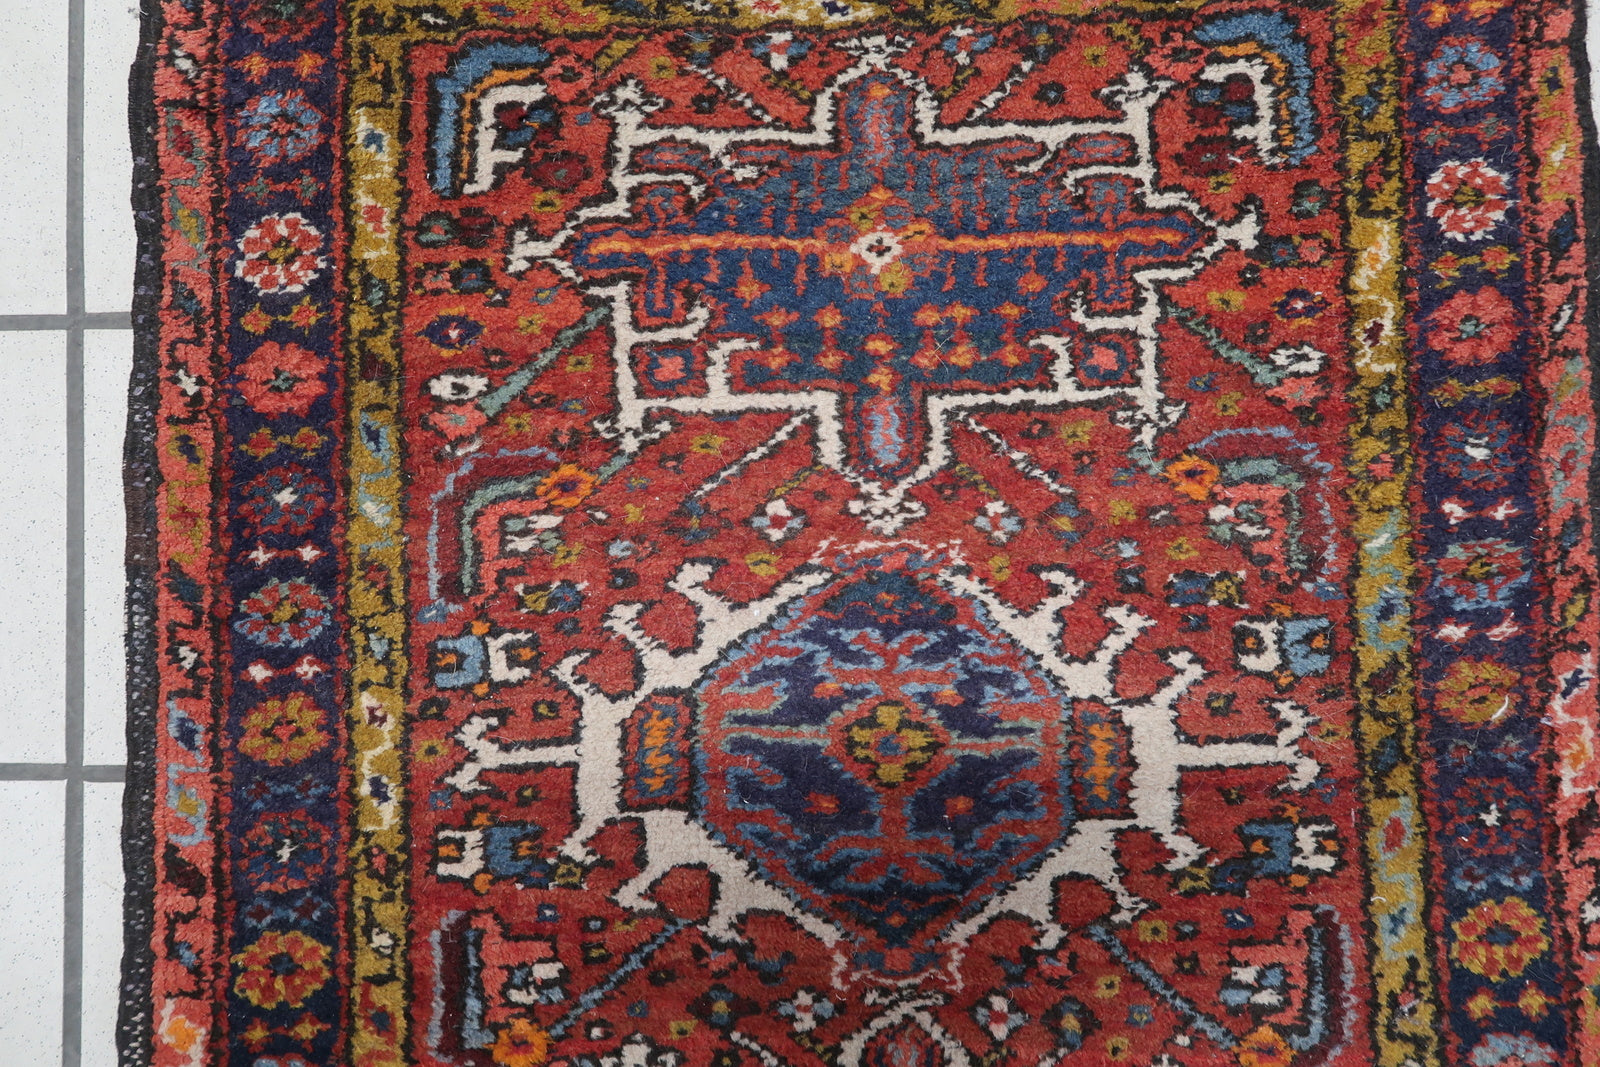 Detailed view of the rich red color and floral motifs on the Handmade Antique Persian Karajeh Rug